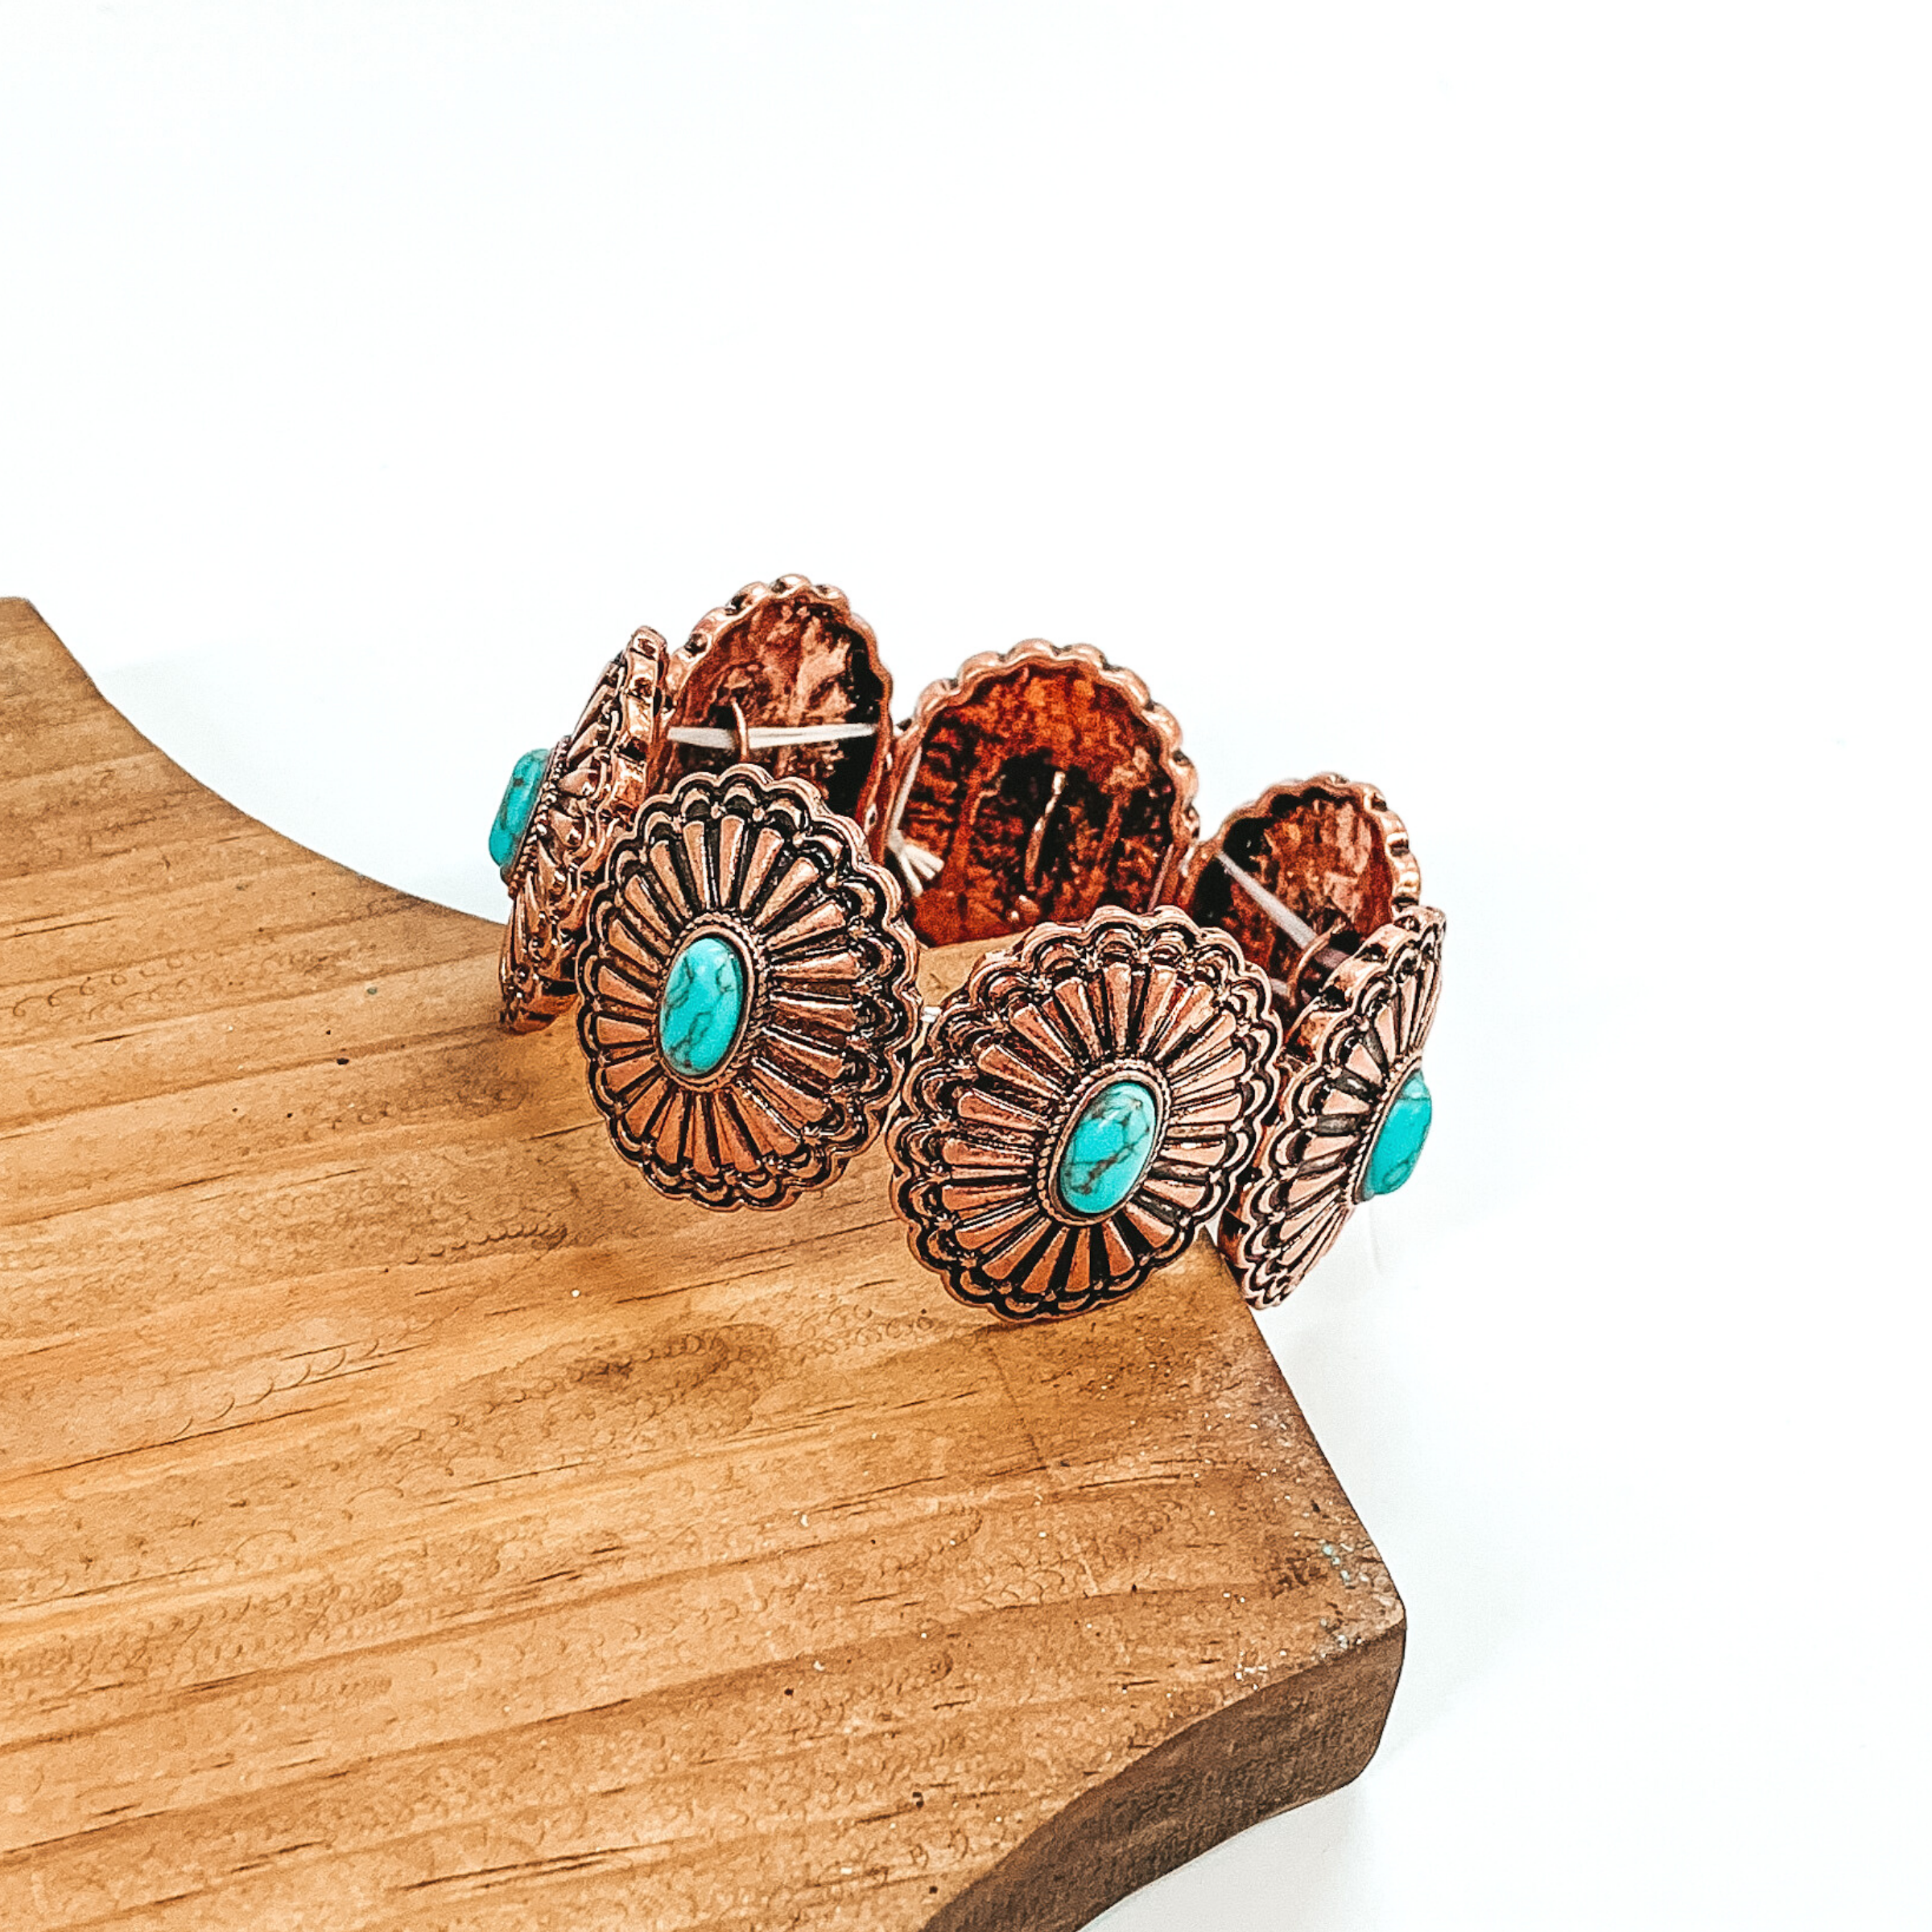 Western Concho Bracelets with Turquoise Center Stones in Copper Tone - Giddy Up Glamour Boutique